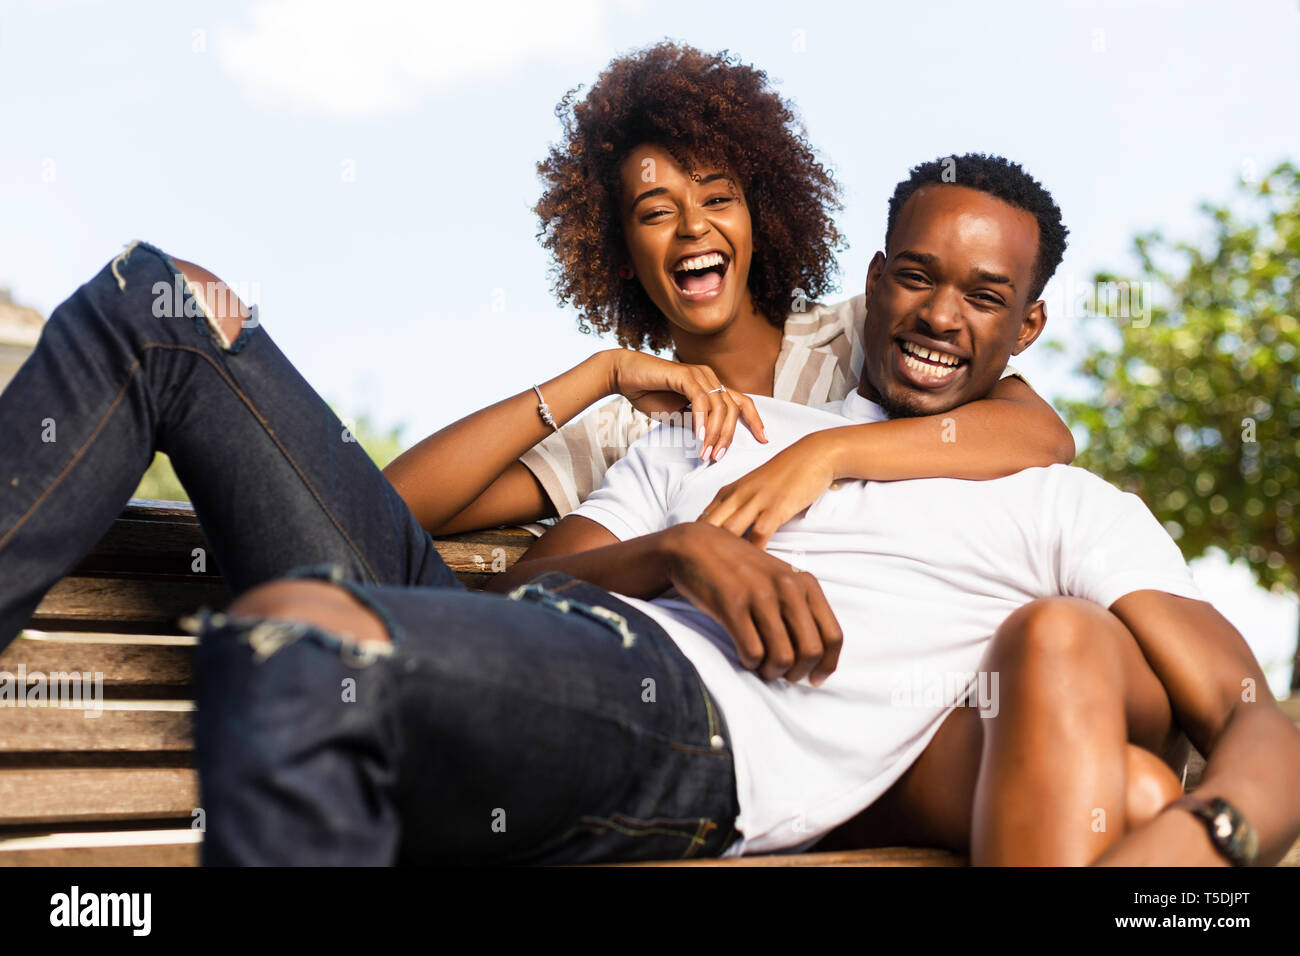 Outdoor Protrait Of Black African American Couple Embracing Each Other